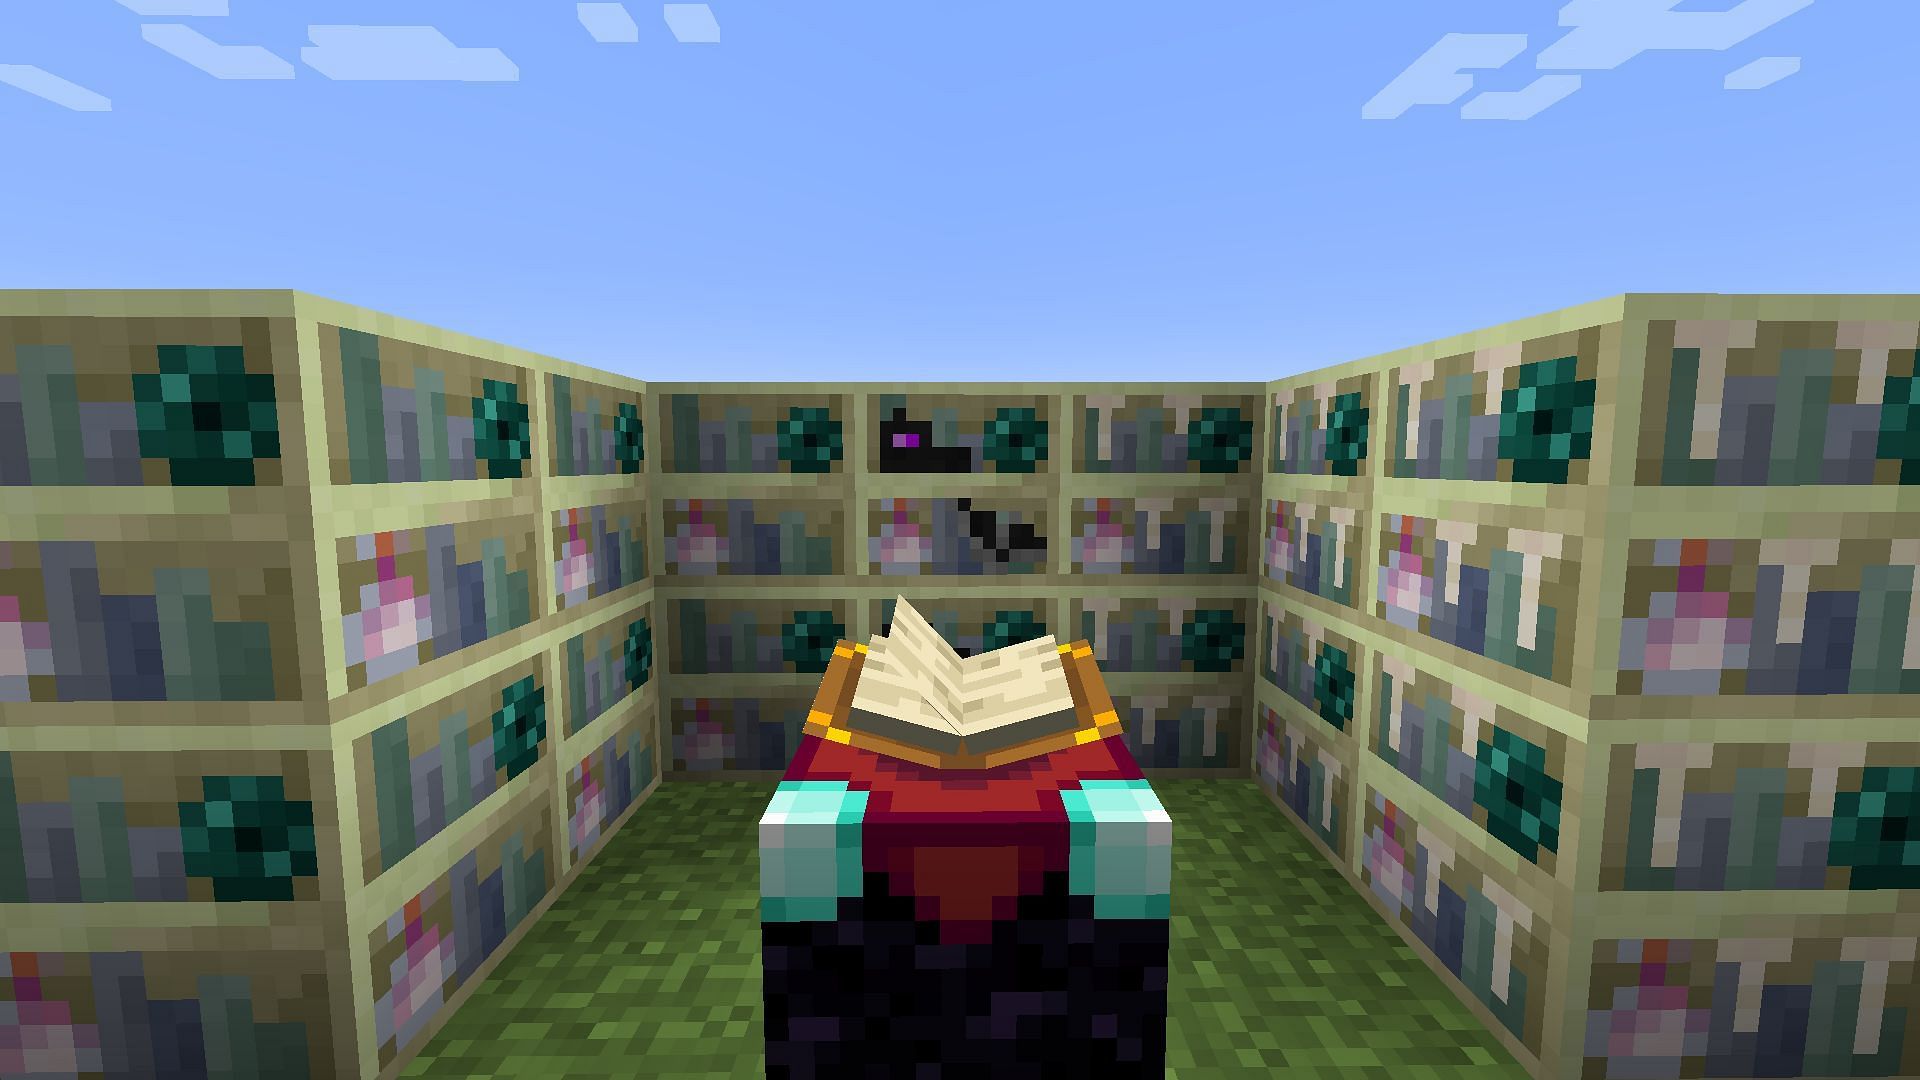 Final themed bookshelves in Apotheosis (Image via Shadows_of_Fire/CurseForge)